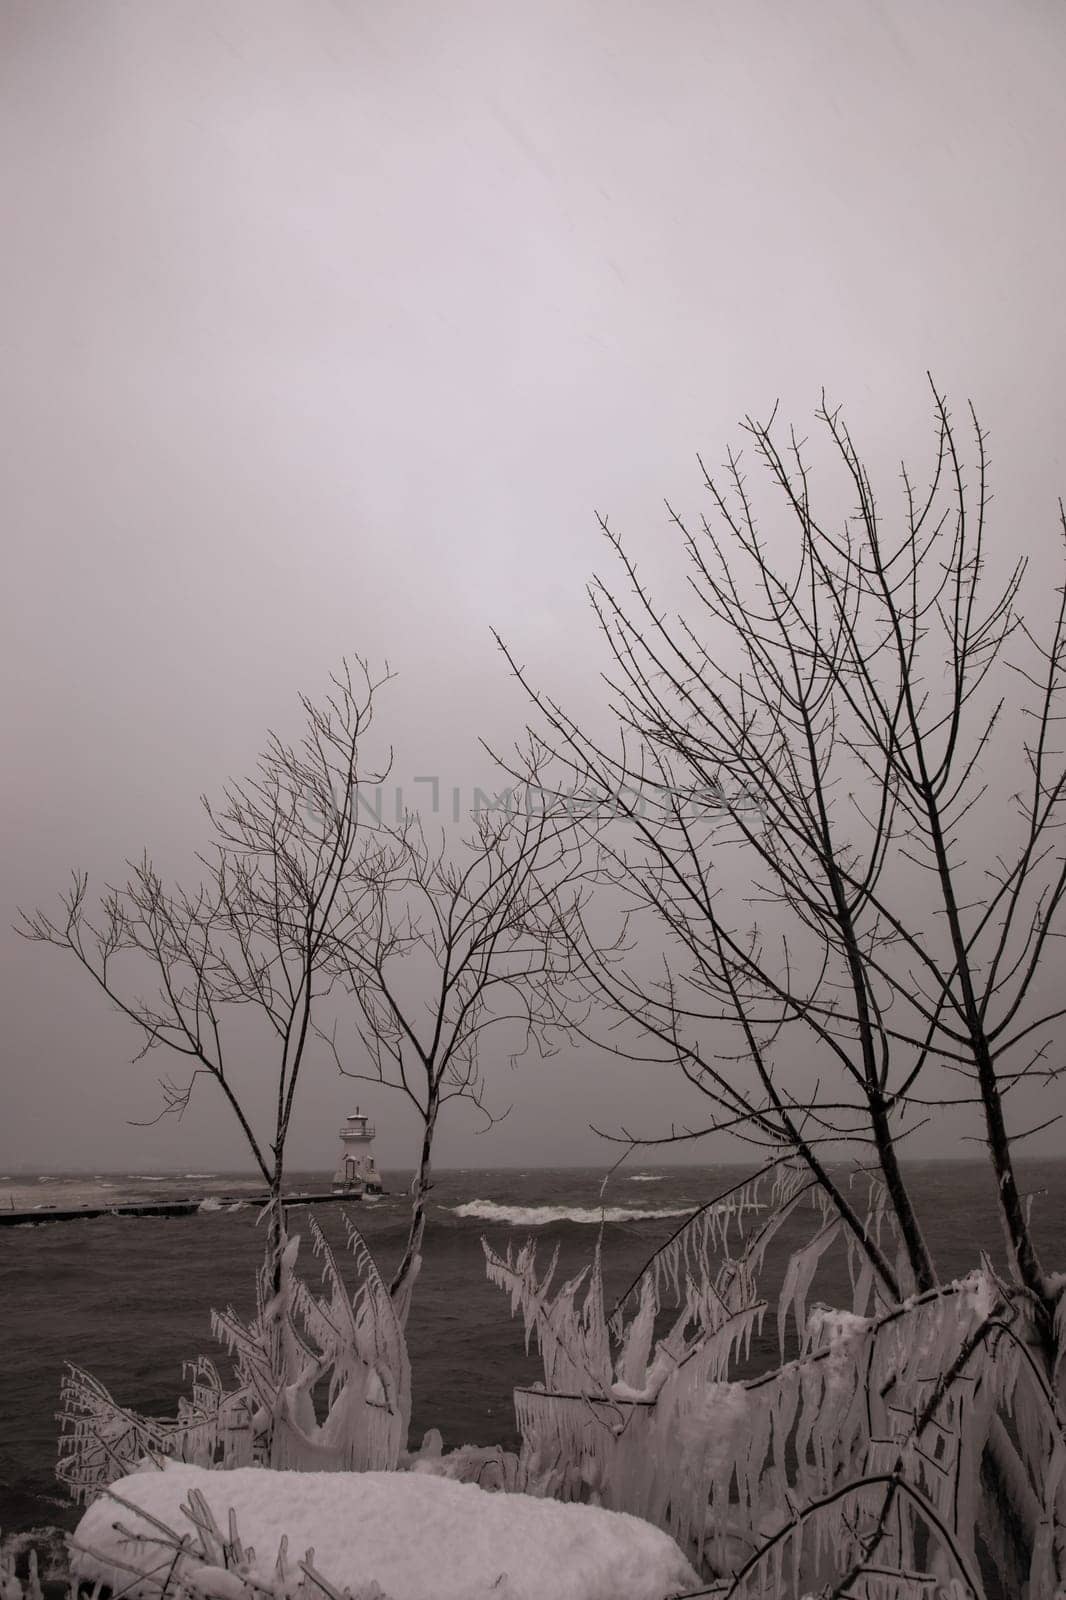 Bare trees covered in snow with a lighthouse and water in the background and an overcast day in the Bruce Peninsula, Ontario by Granchinho